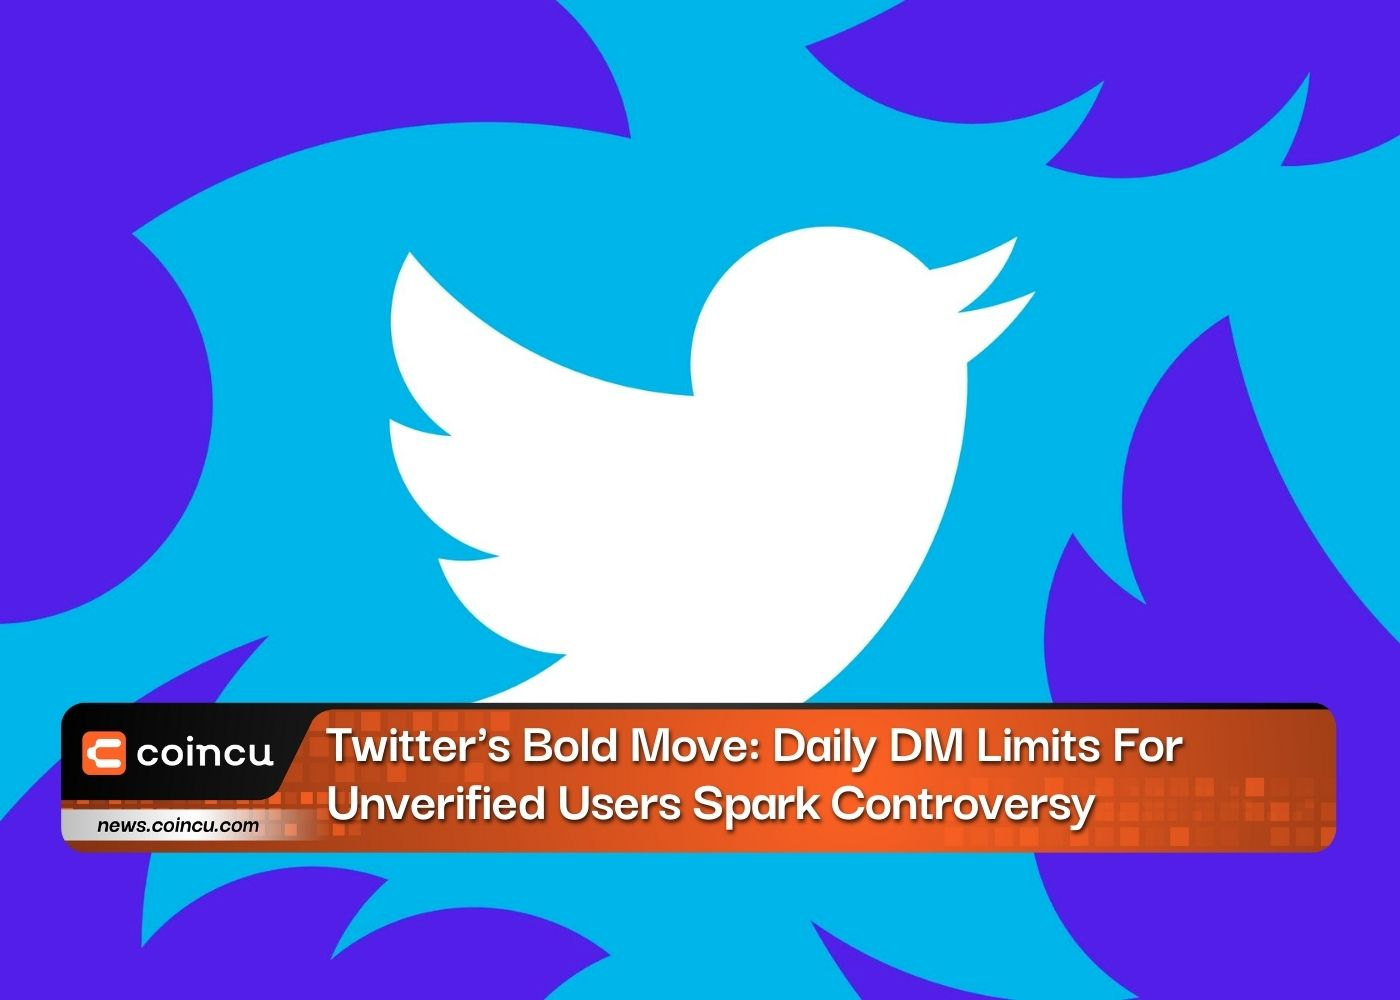 Twitter’s Bold Move: Daily DM Limits For Unverified Users Spark Controversy